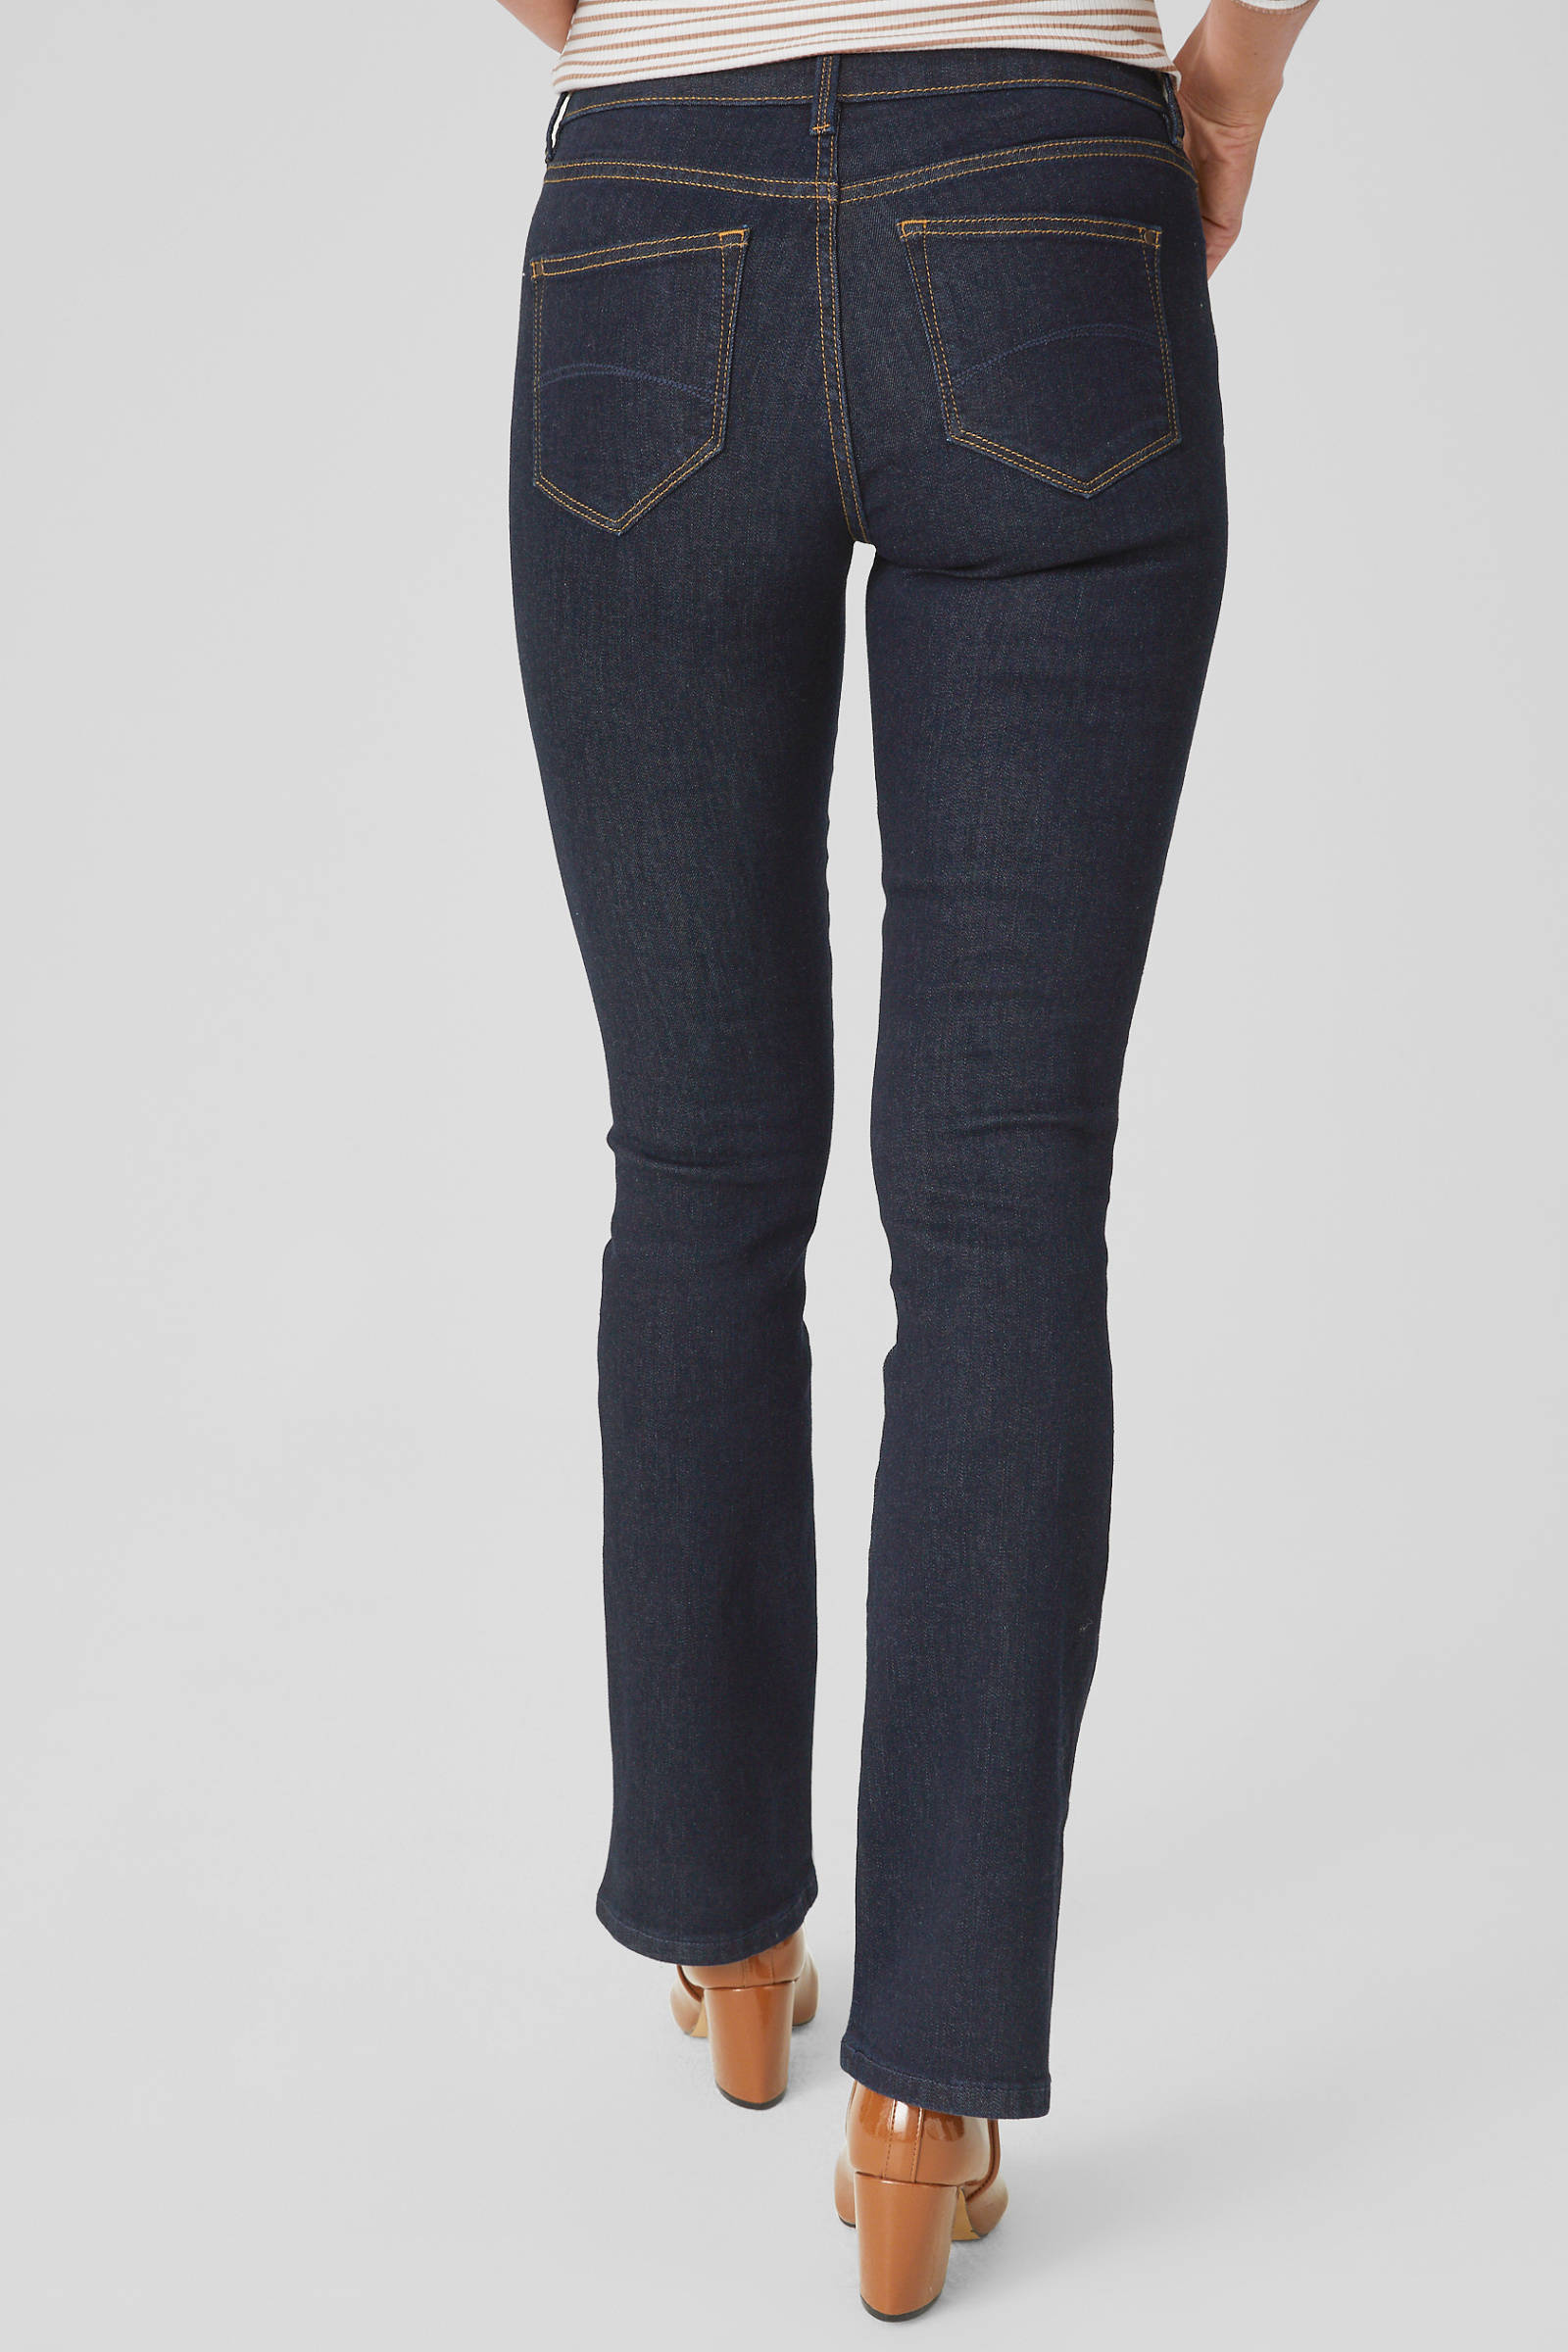 flared jeans c&a